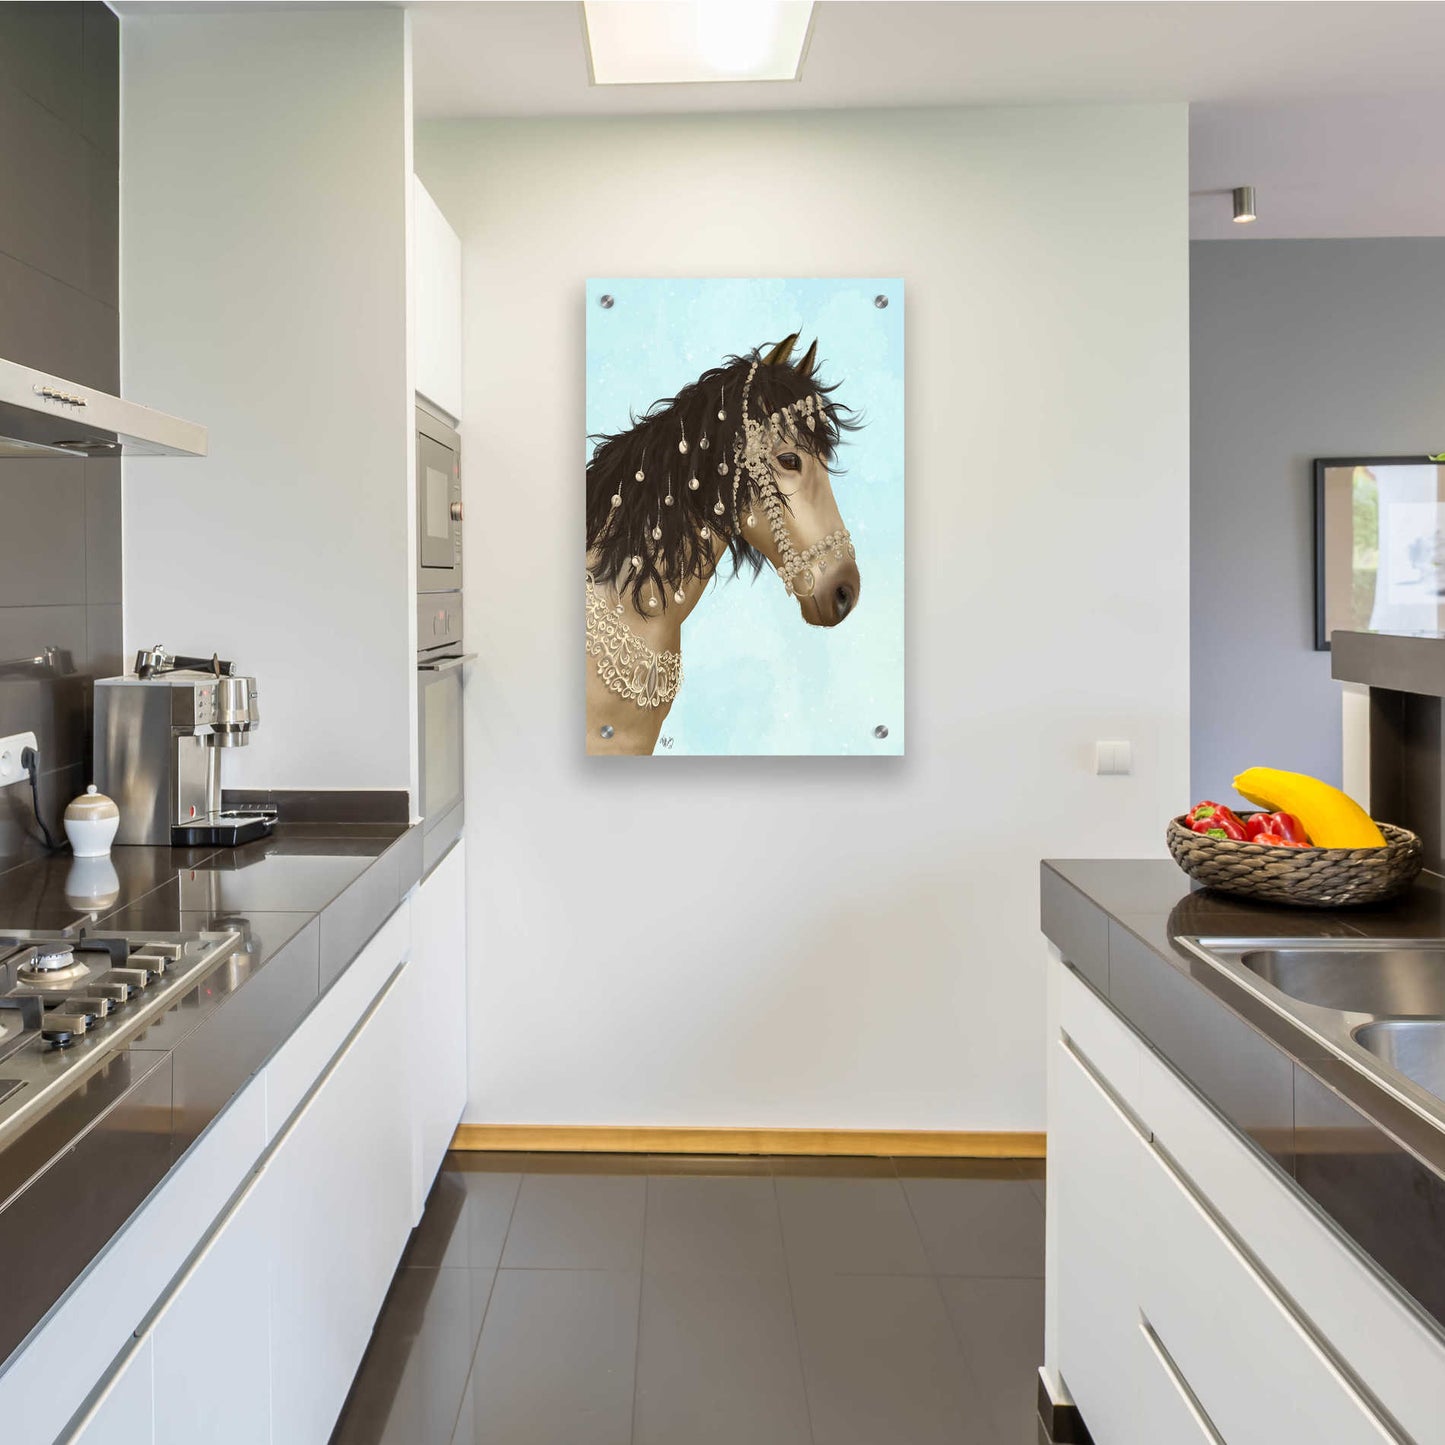 Epic Art 'Horse Buckskin with Jewelled Bridle' by Fab Funky, Acrylic Glass Wall Art,24x36